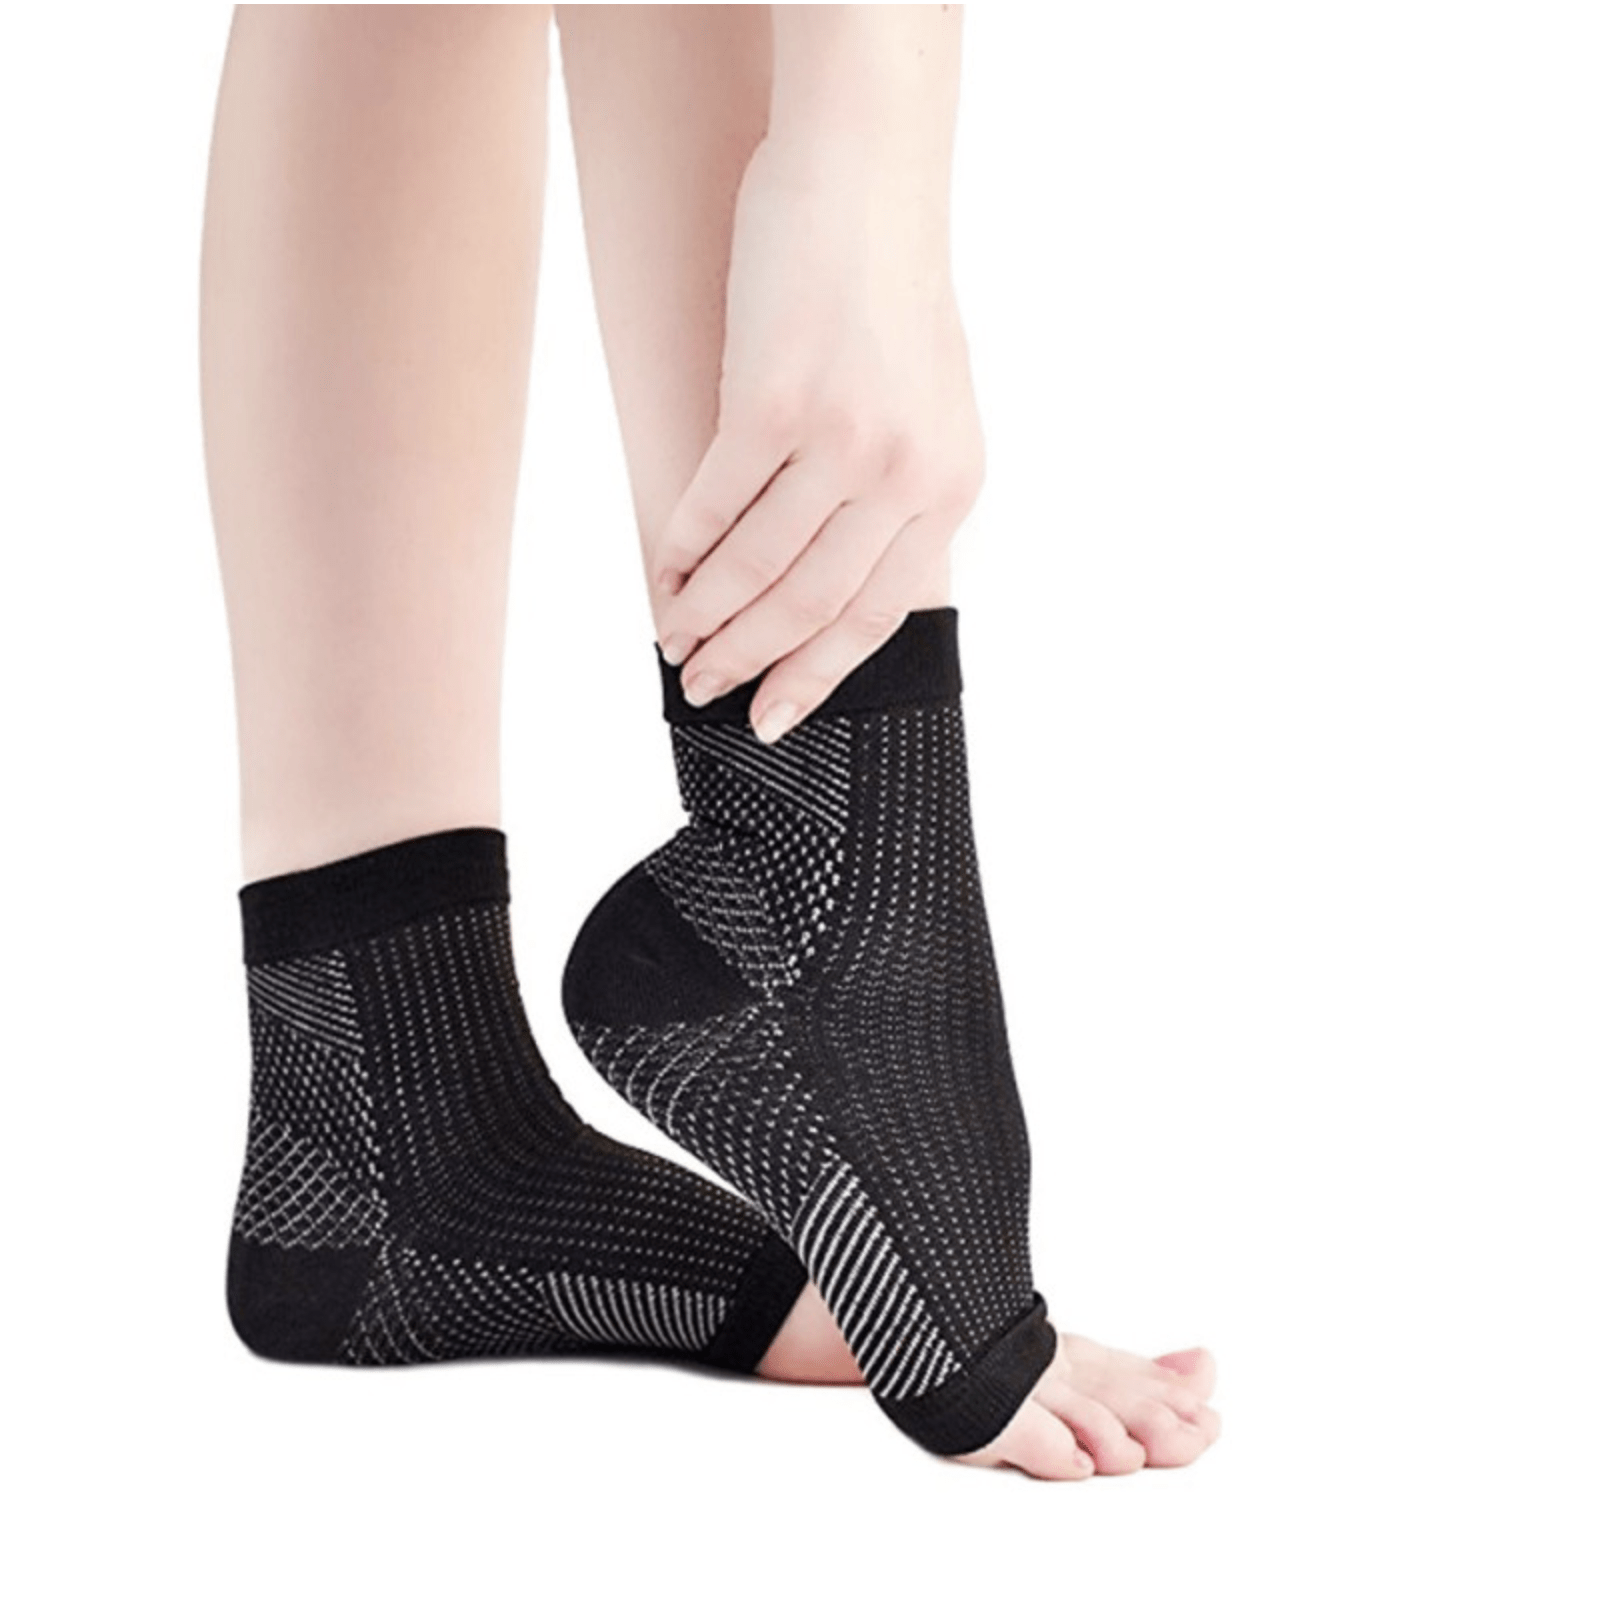 Amazon.com: Plantar Fasciitis Foot Pain Relief 14-Piece Kit – Premium  Planter Fasciitis Support, Gel Heel Spur & Therapy Wraps, Compression Socks,  Foot Sleeves, Arch Supports, Heel Cushion Inserts & Grips : Health